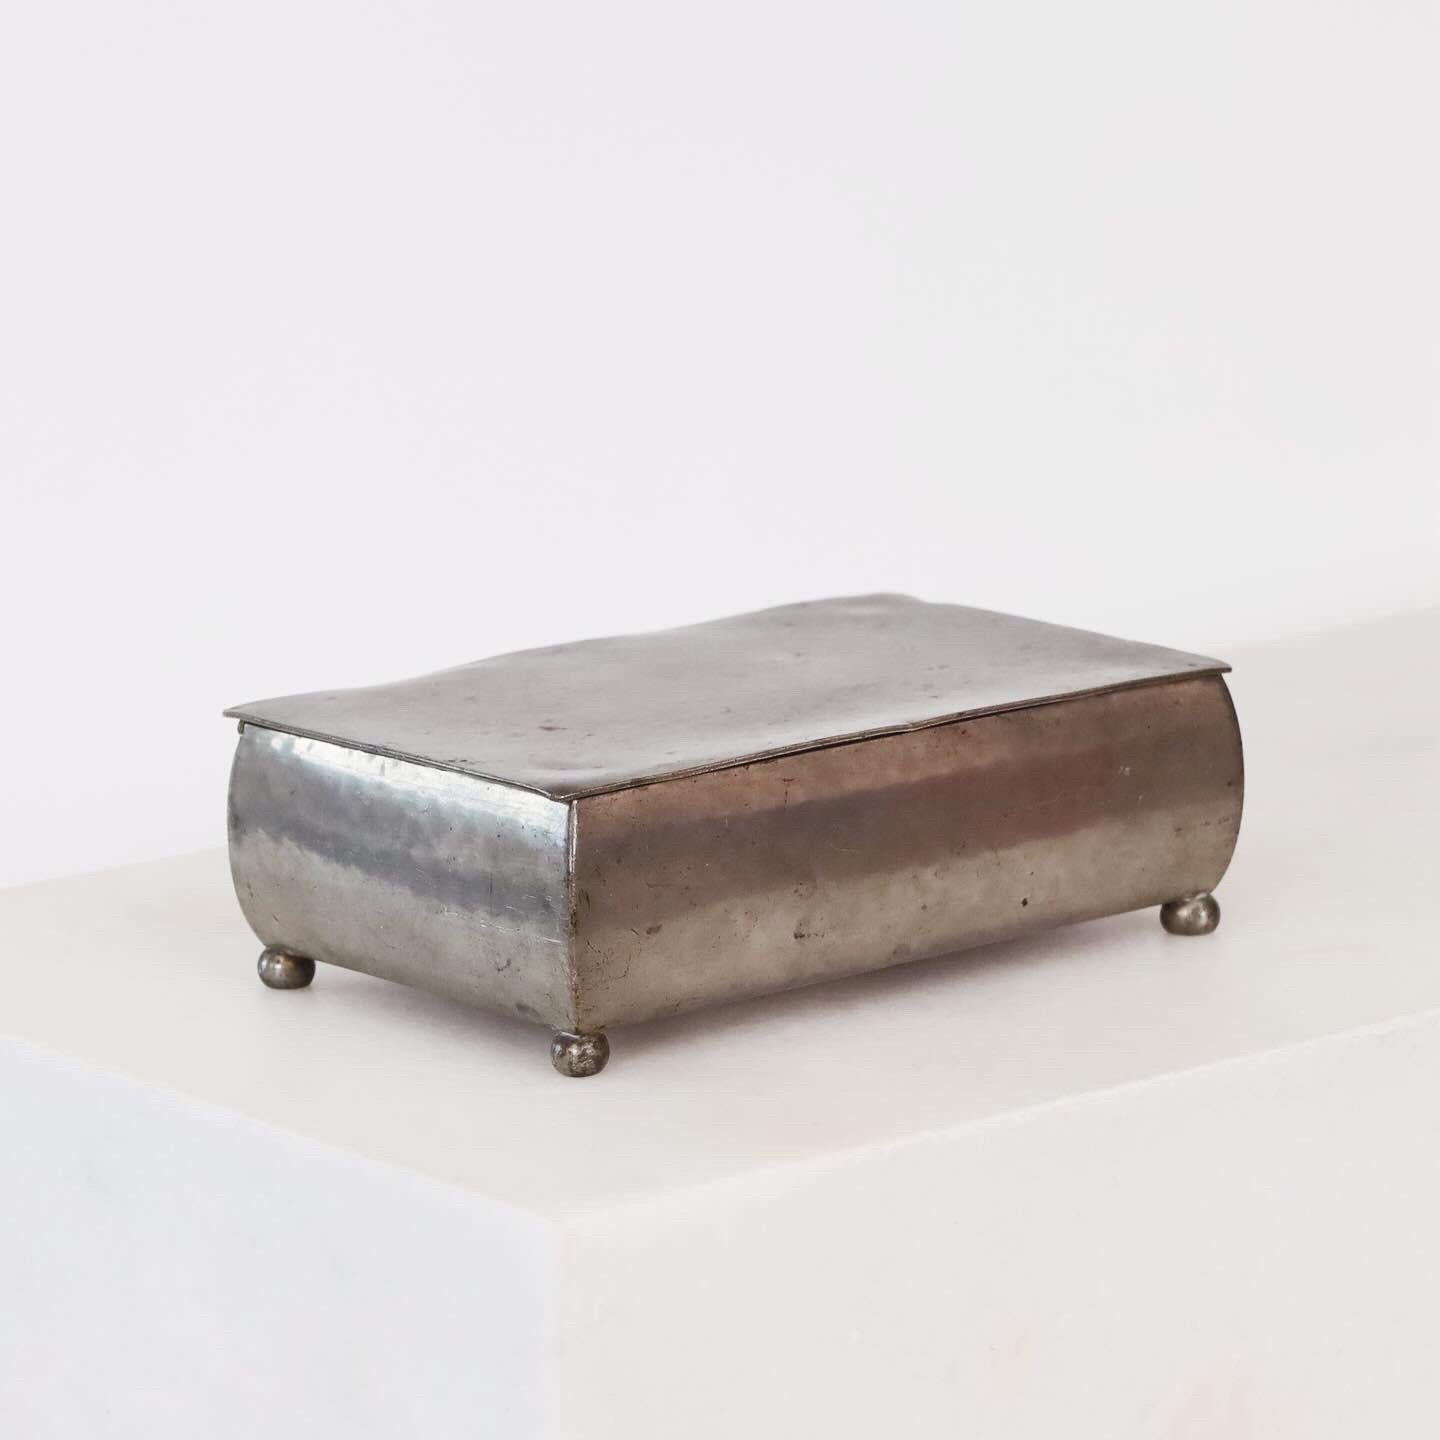 A lidded pewter box made by Just Andersen in the 1920s. A timeless piece with 100 years of stories. 

* A lidded pewter box with a wooden inner box. Originally cigarette box.
* Designer: Just Andersen
* Style: 55C
* Manufacturer: Just Andersen
*